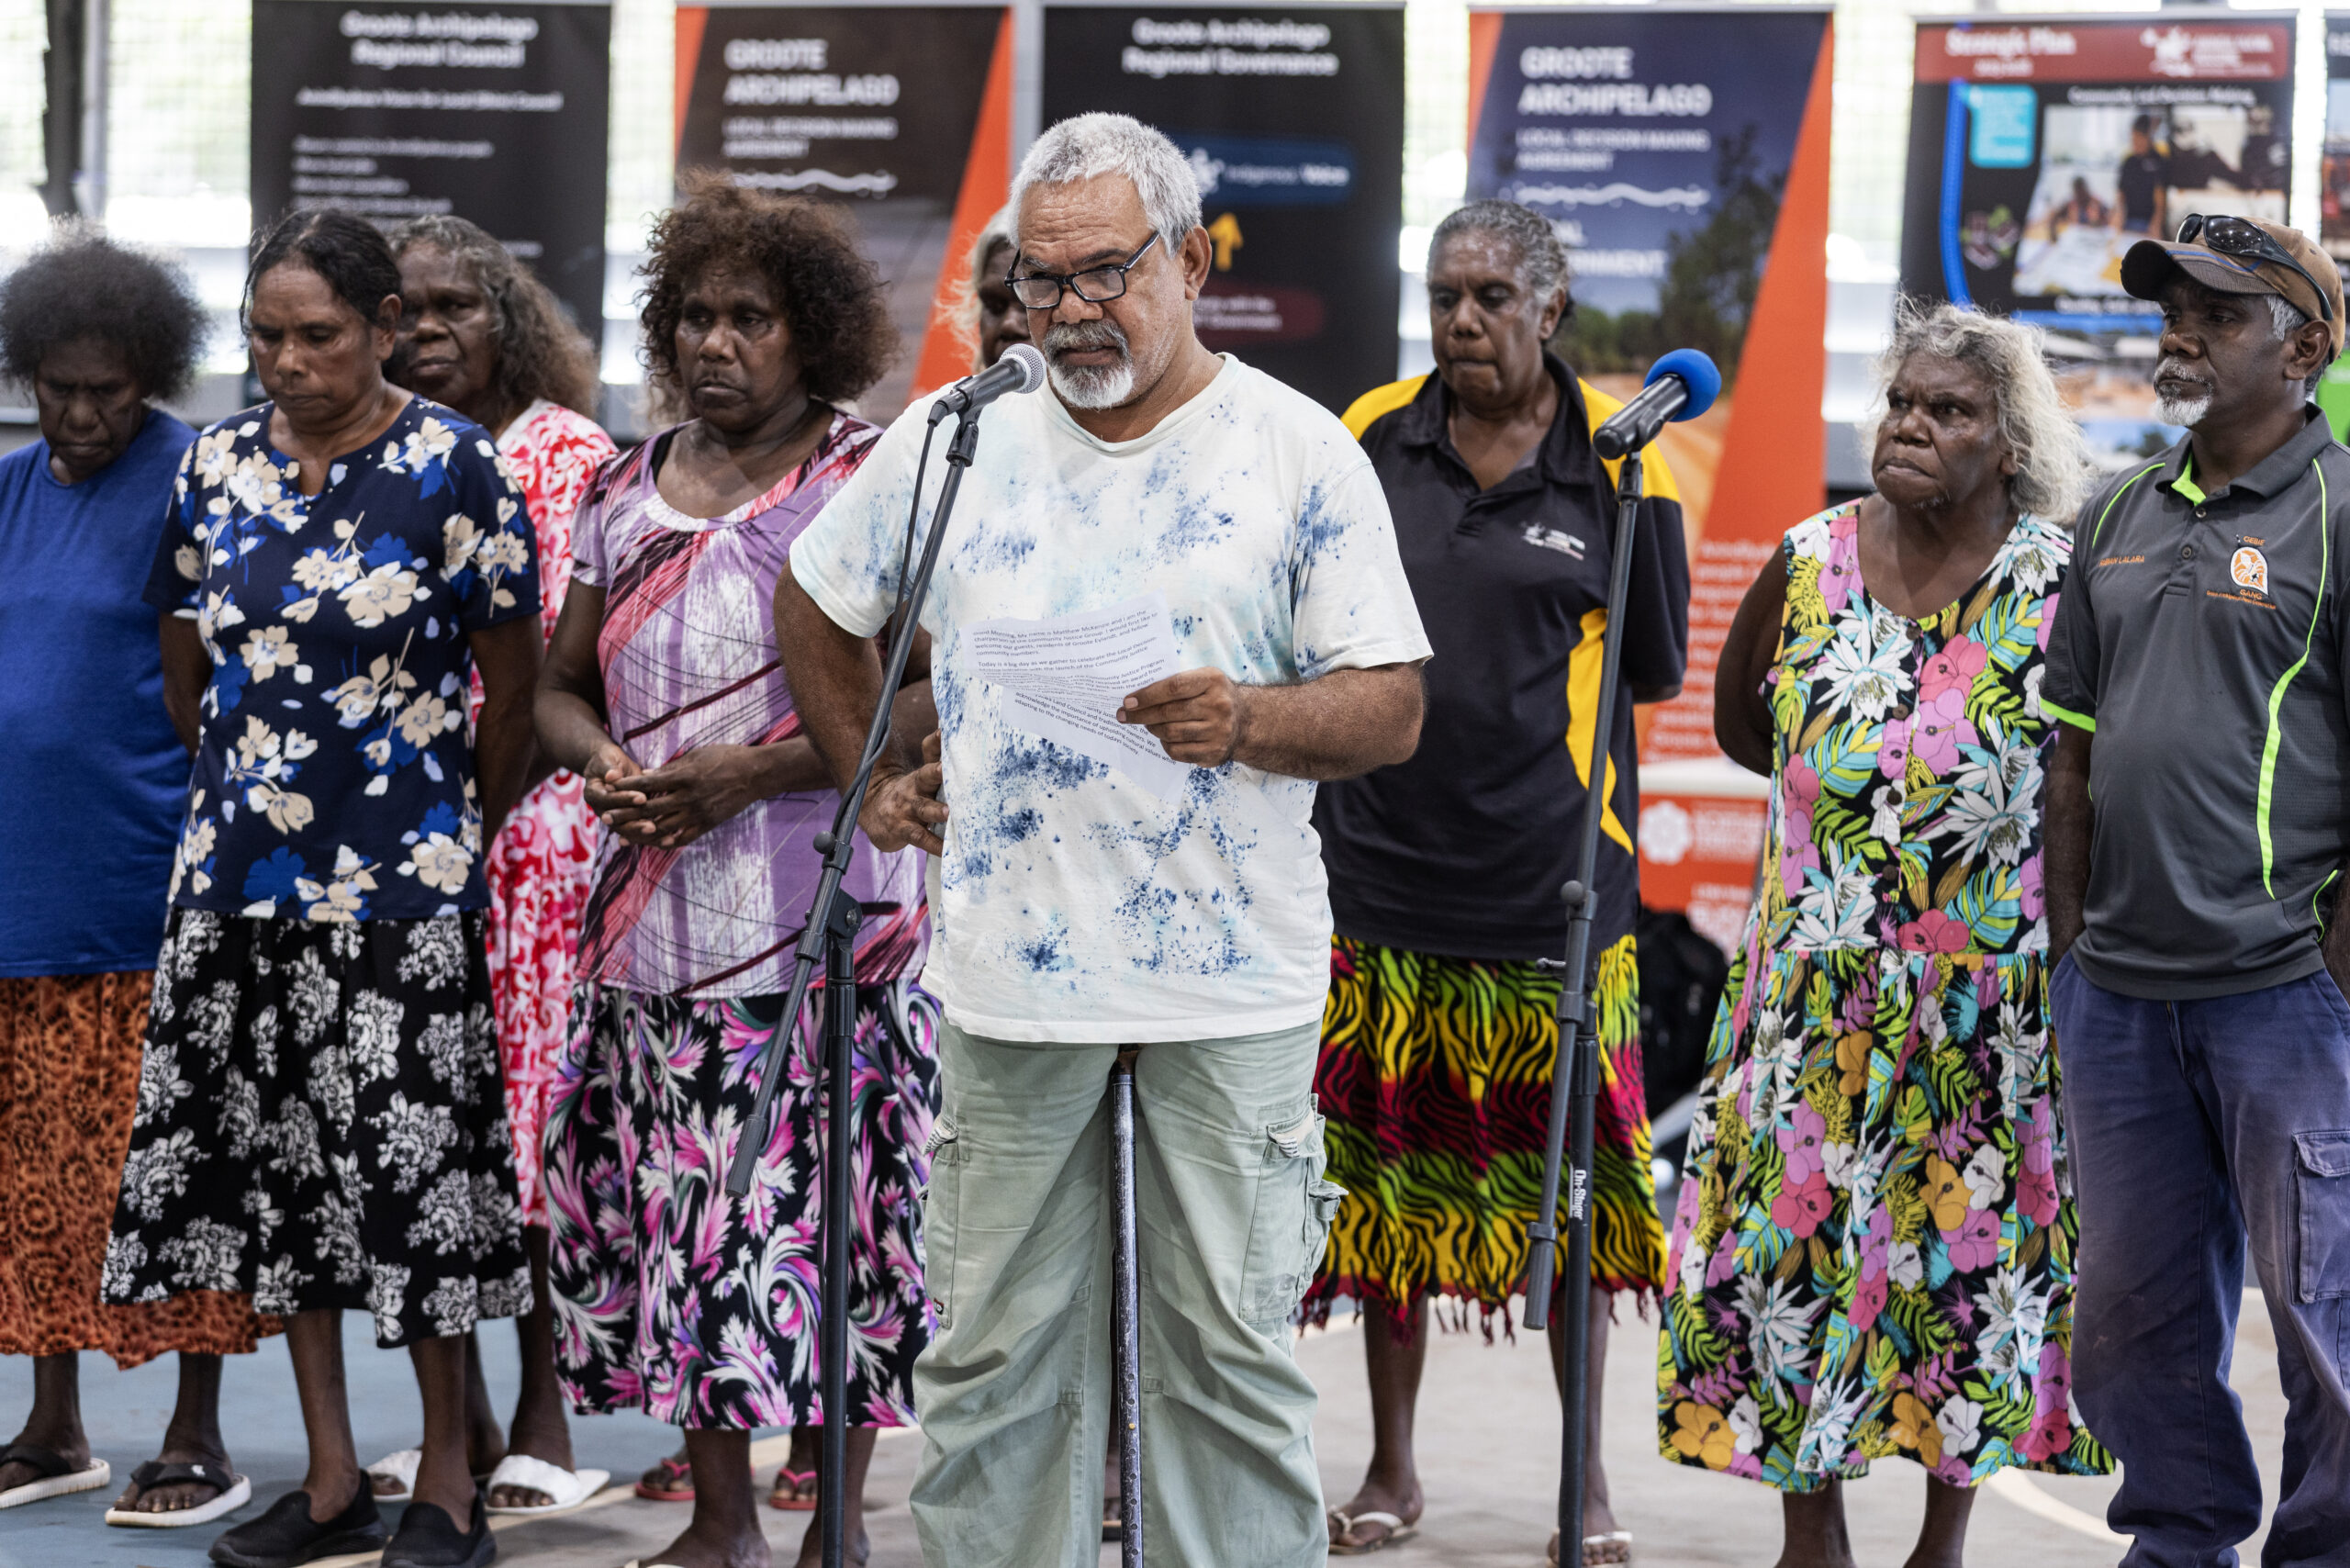 The ALC celebrates an NT first in Law and Justice